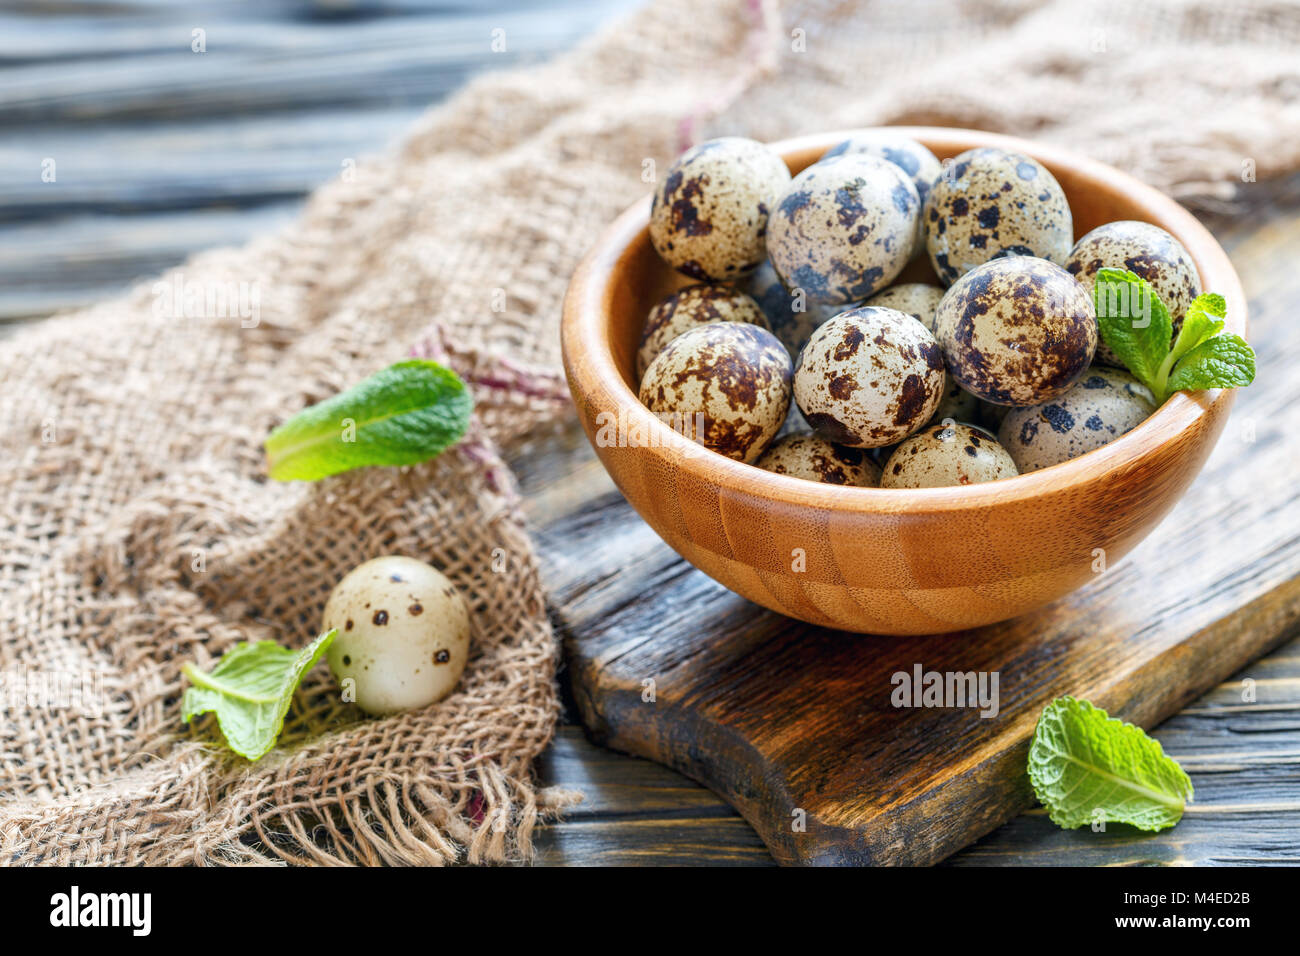 Wooden bowl with speckled quail eggs. Stock Photo